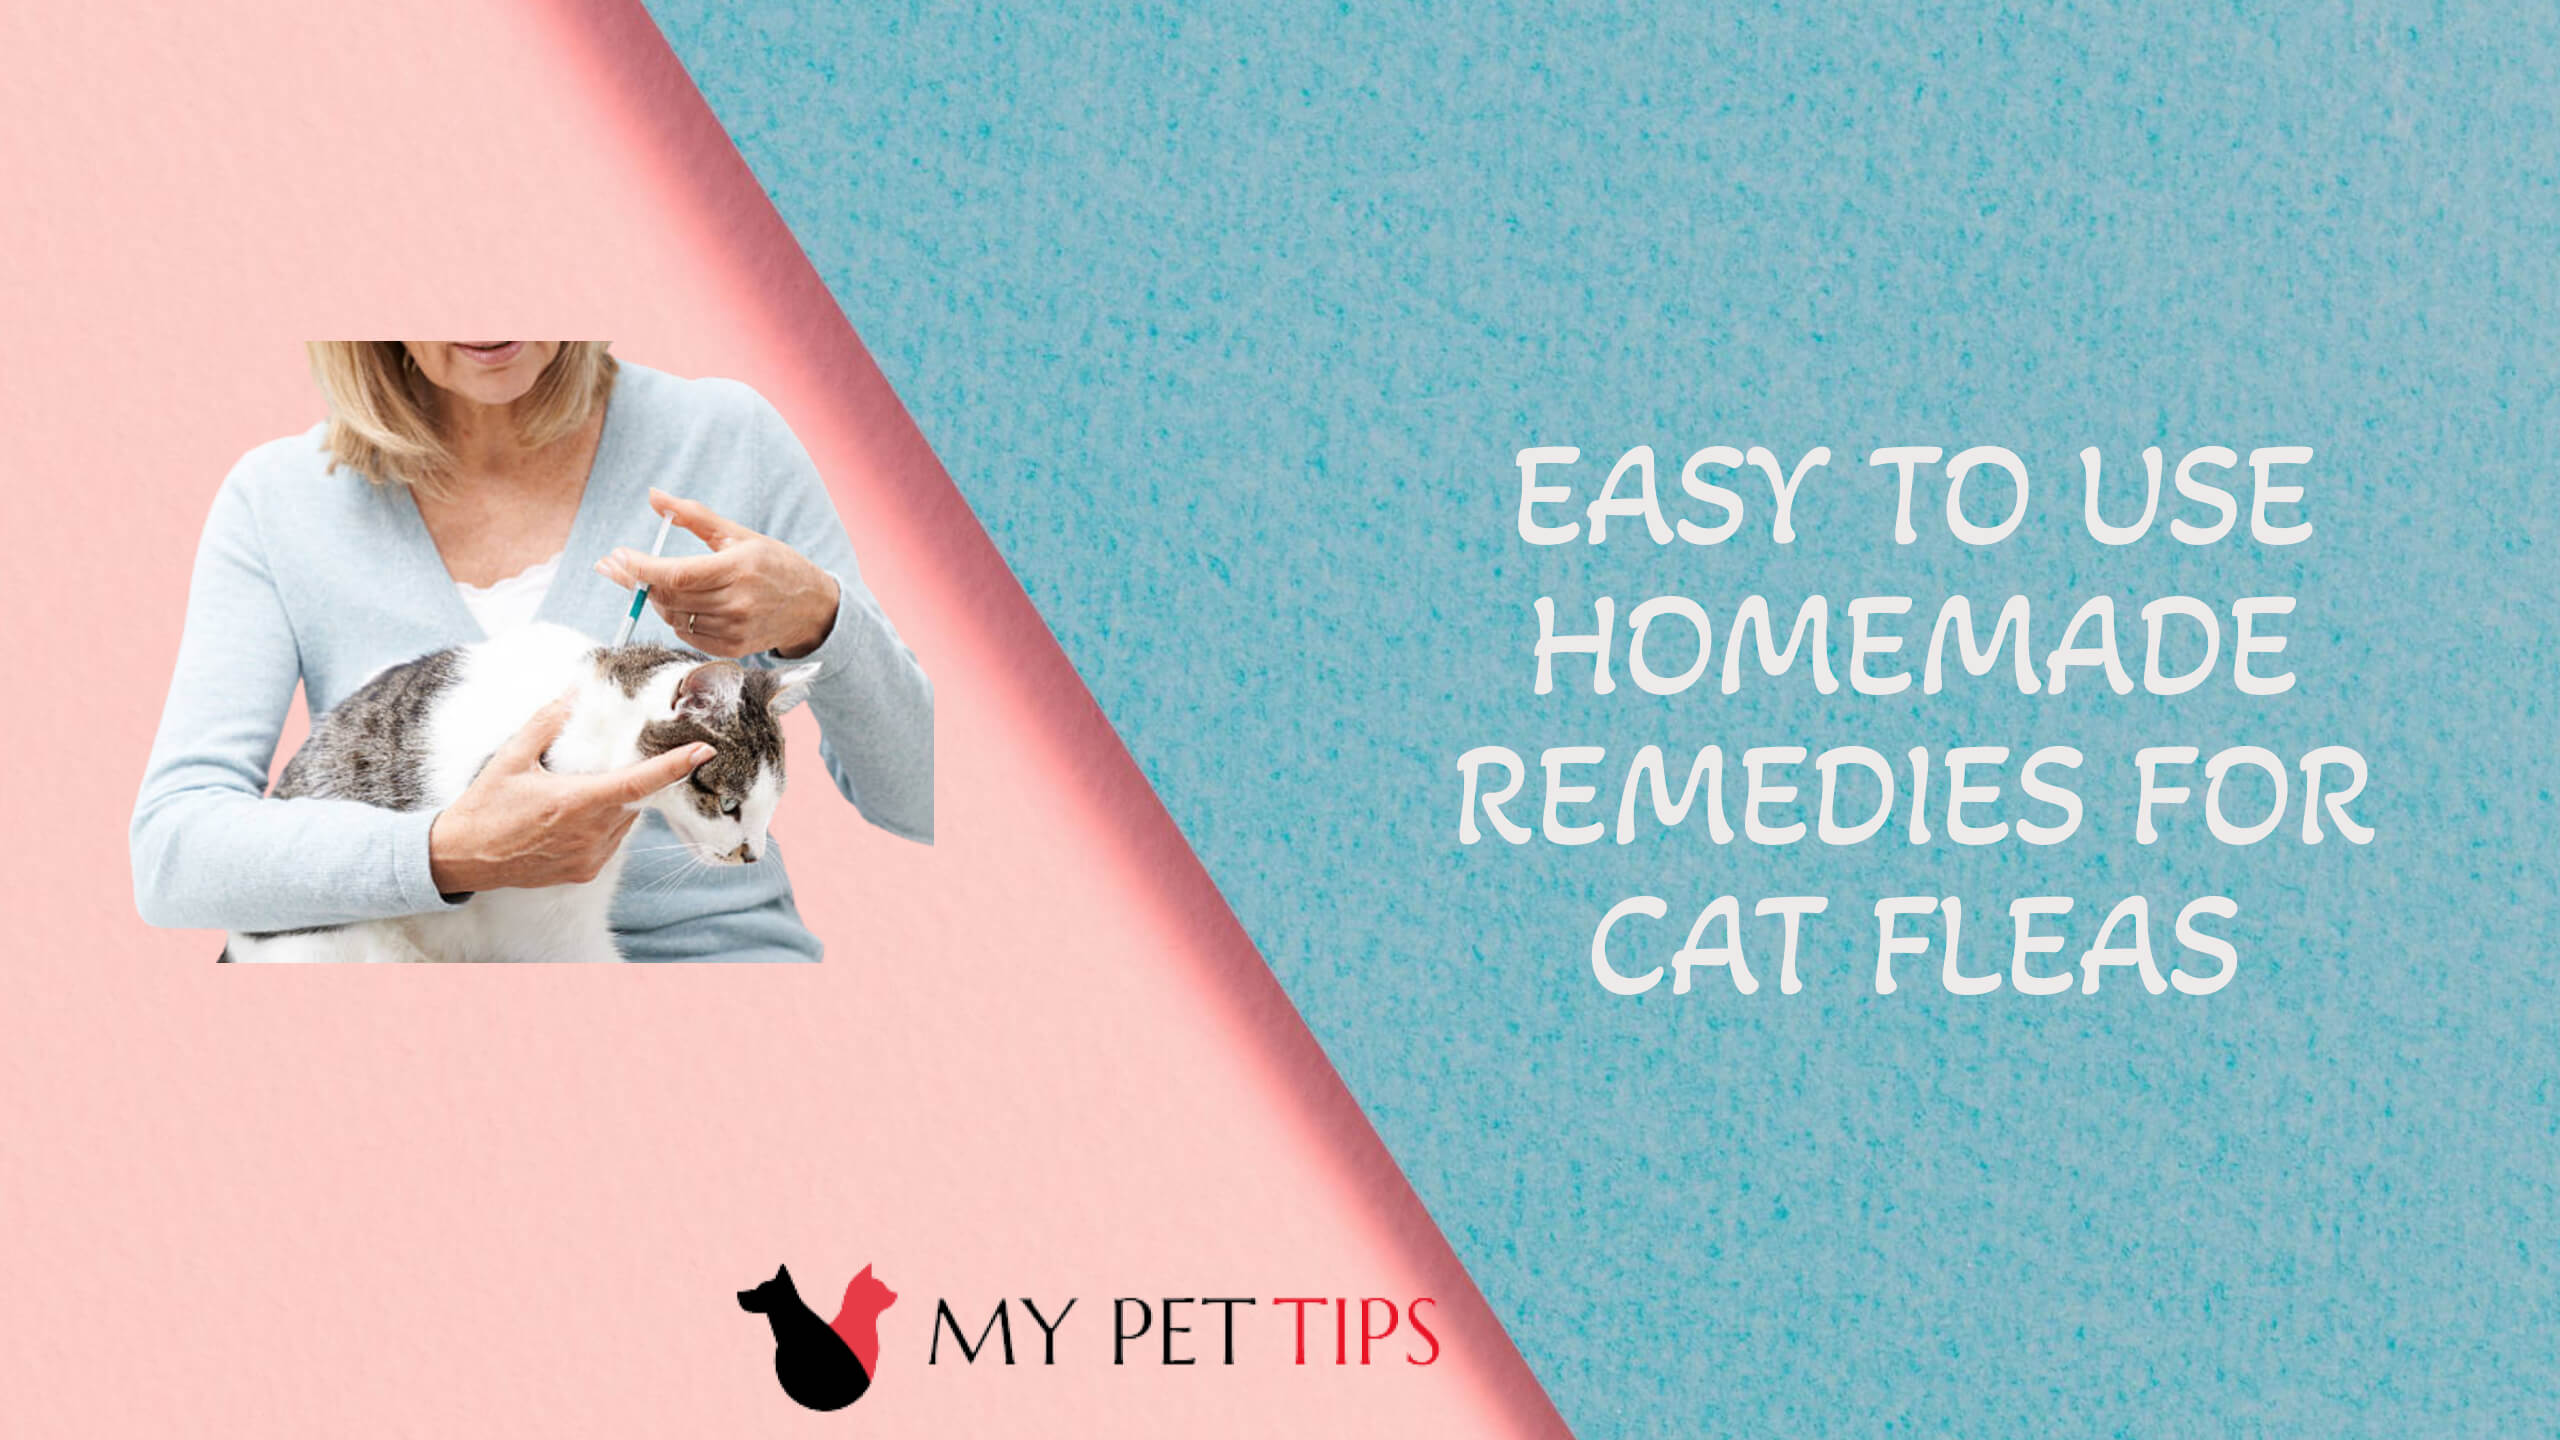 Easy to use homemade remedies for cat fleas